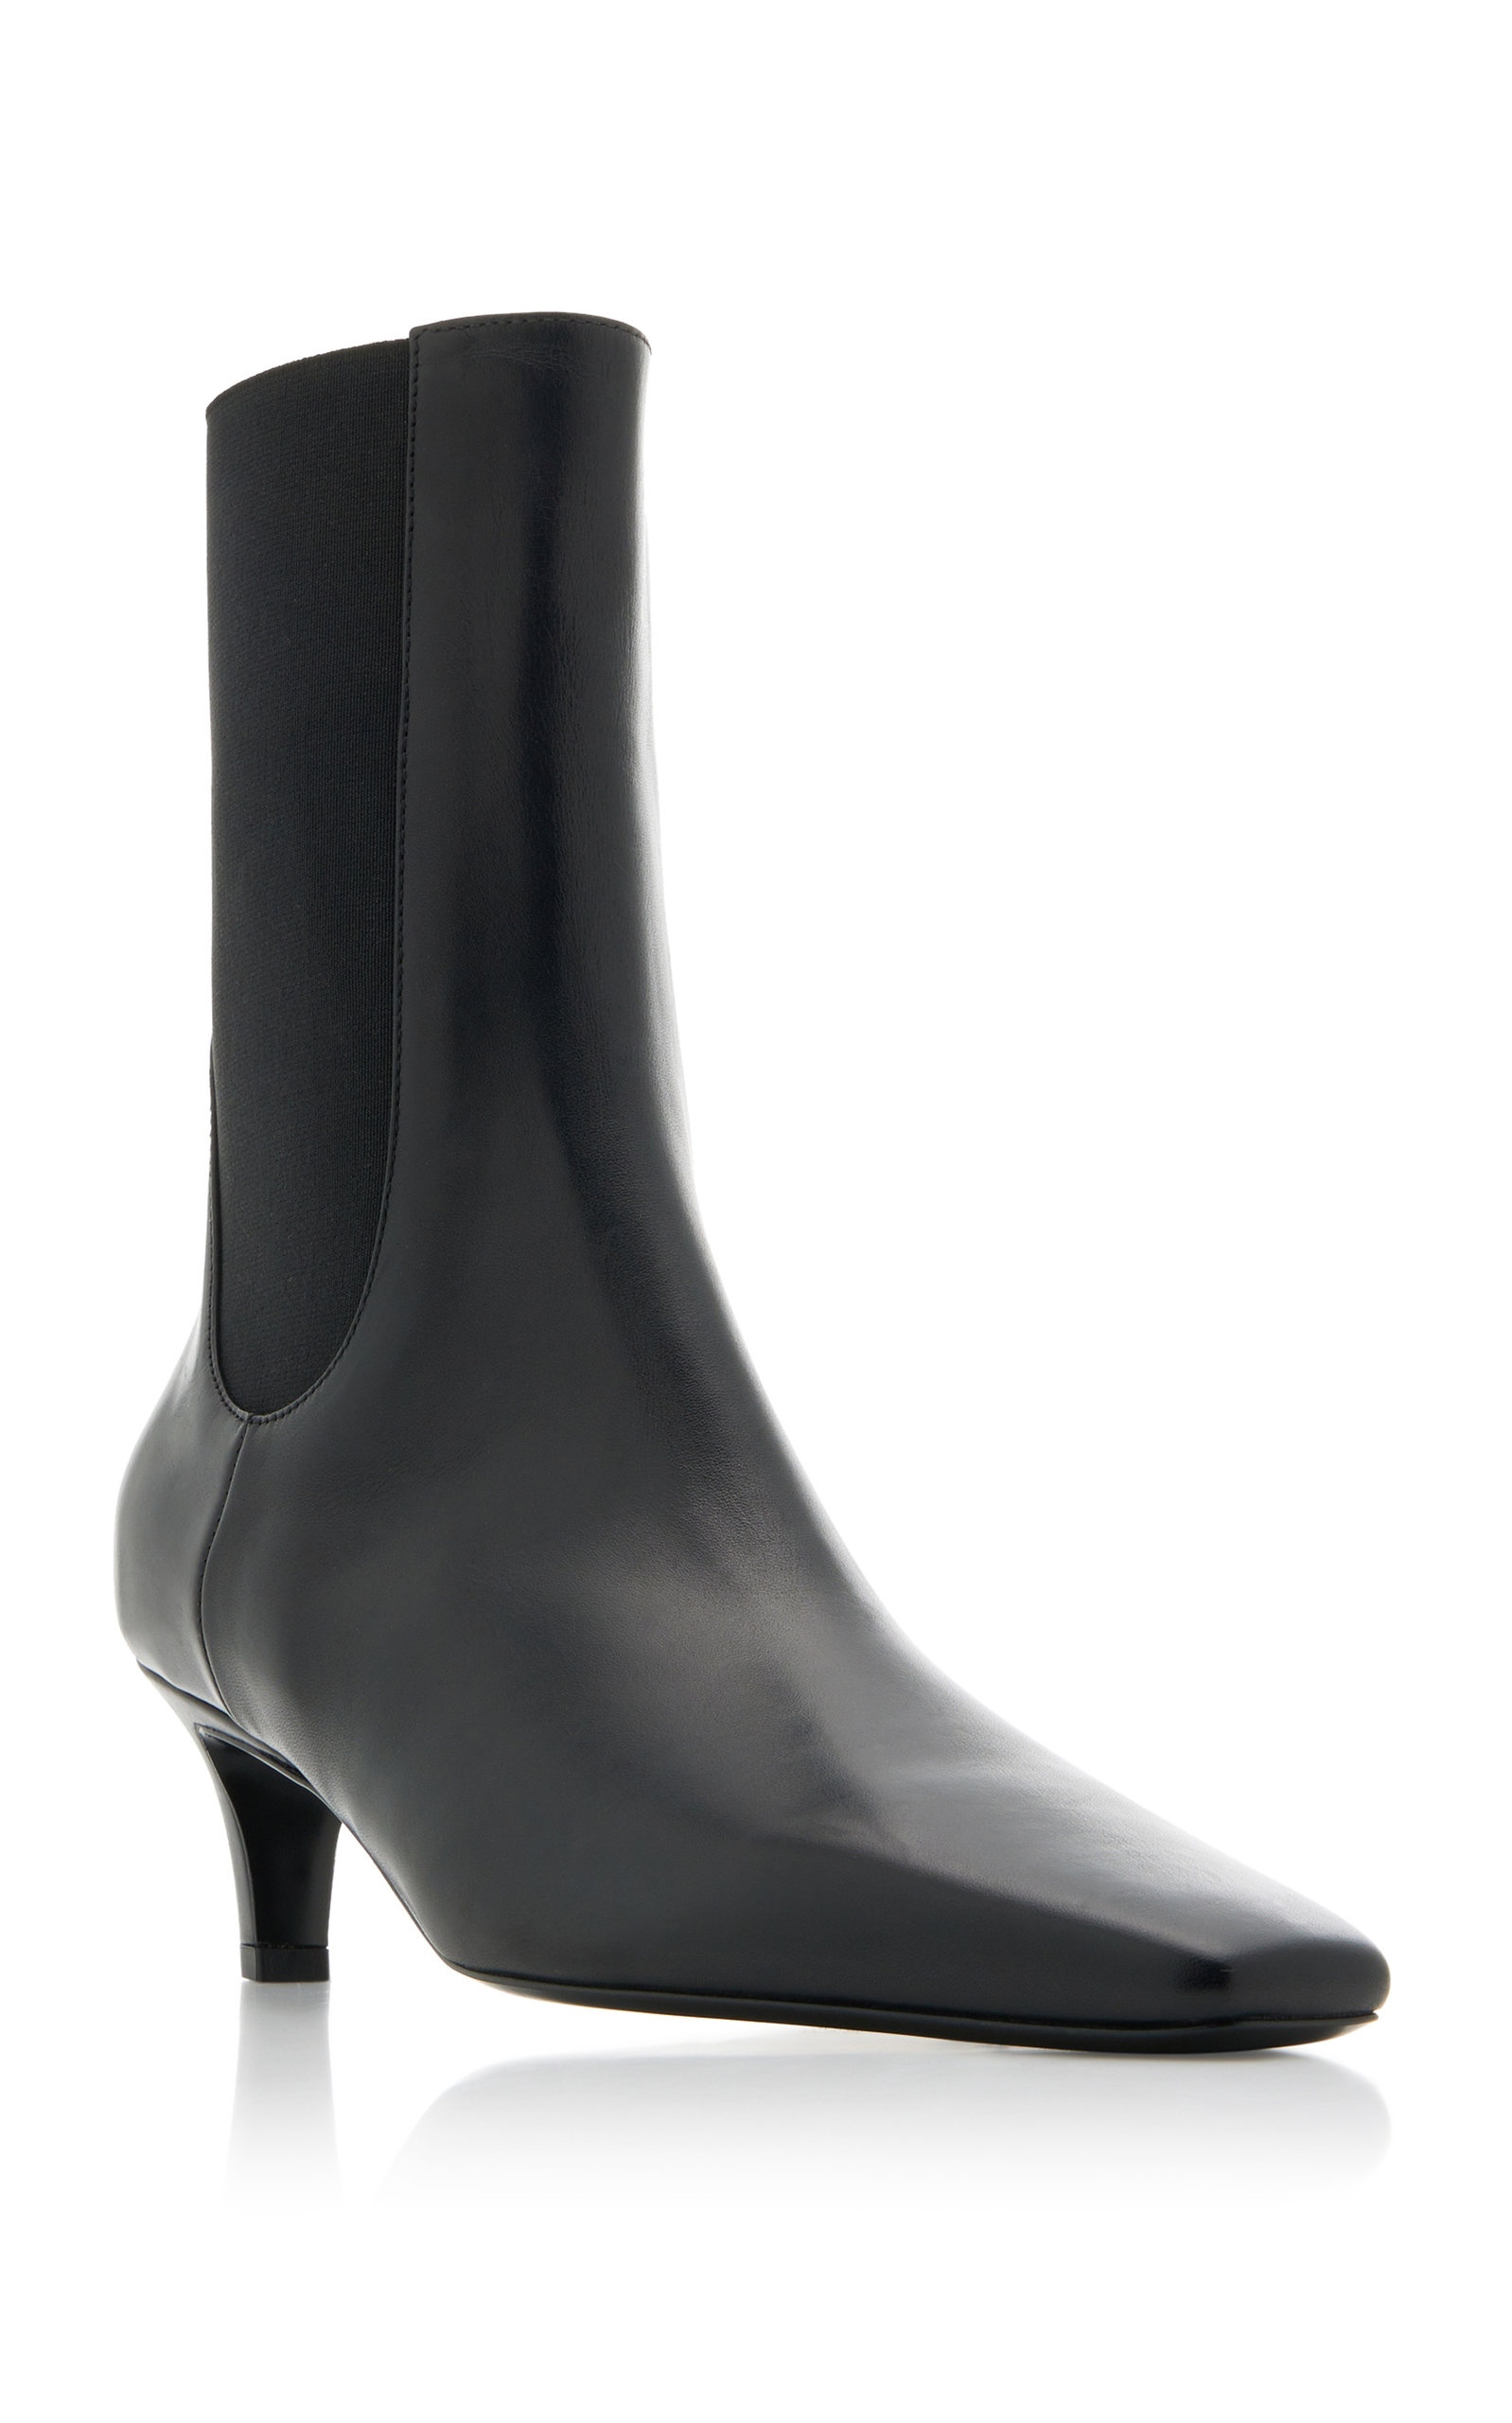 The Mid Heel Leather Boots black - 5